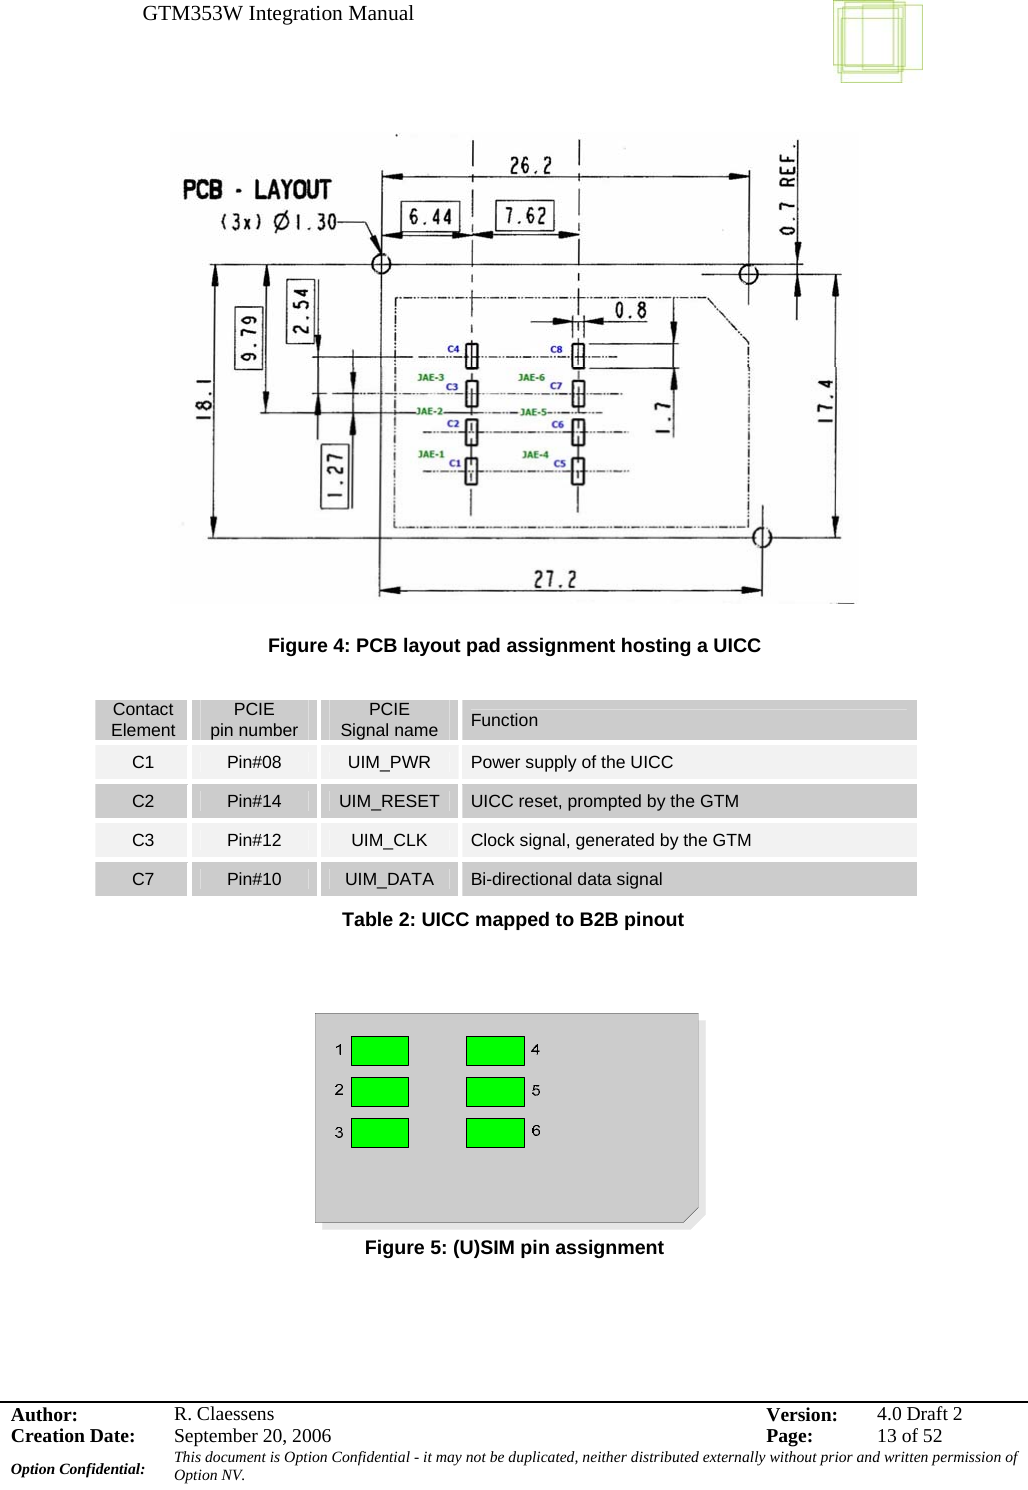 GTM353W Integration Manual      Author: R. Claessens  Version:  4.0 Draft 2Creation Date:  September 20, 2006  Page:  13 of 52 Option Confidential:  This document is Option Confidential - it may not be duplicated, neither distributed externally without prior and written permission of Option NV.      Figure 4: PCB layout pad assignment hosting a UICC  Contact Element  PCIE pin number  PCIE Signal name  Function C1  Pin#08  UIM_PWR  Power supply of the UICC C2  Pin#14  UIM_RESET  UICC reset, prompted by the GTM C3  Pin#12  UIM_CLK  Clock signal, generated by the GTM C7  Pin#10  UIM_DATA  Bi-directional data signal  Table 2: UICC mapped to B2B pinout    Figure 5: (U)SIM pin assignment 